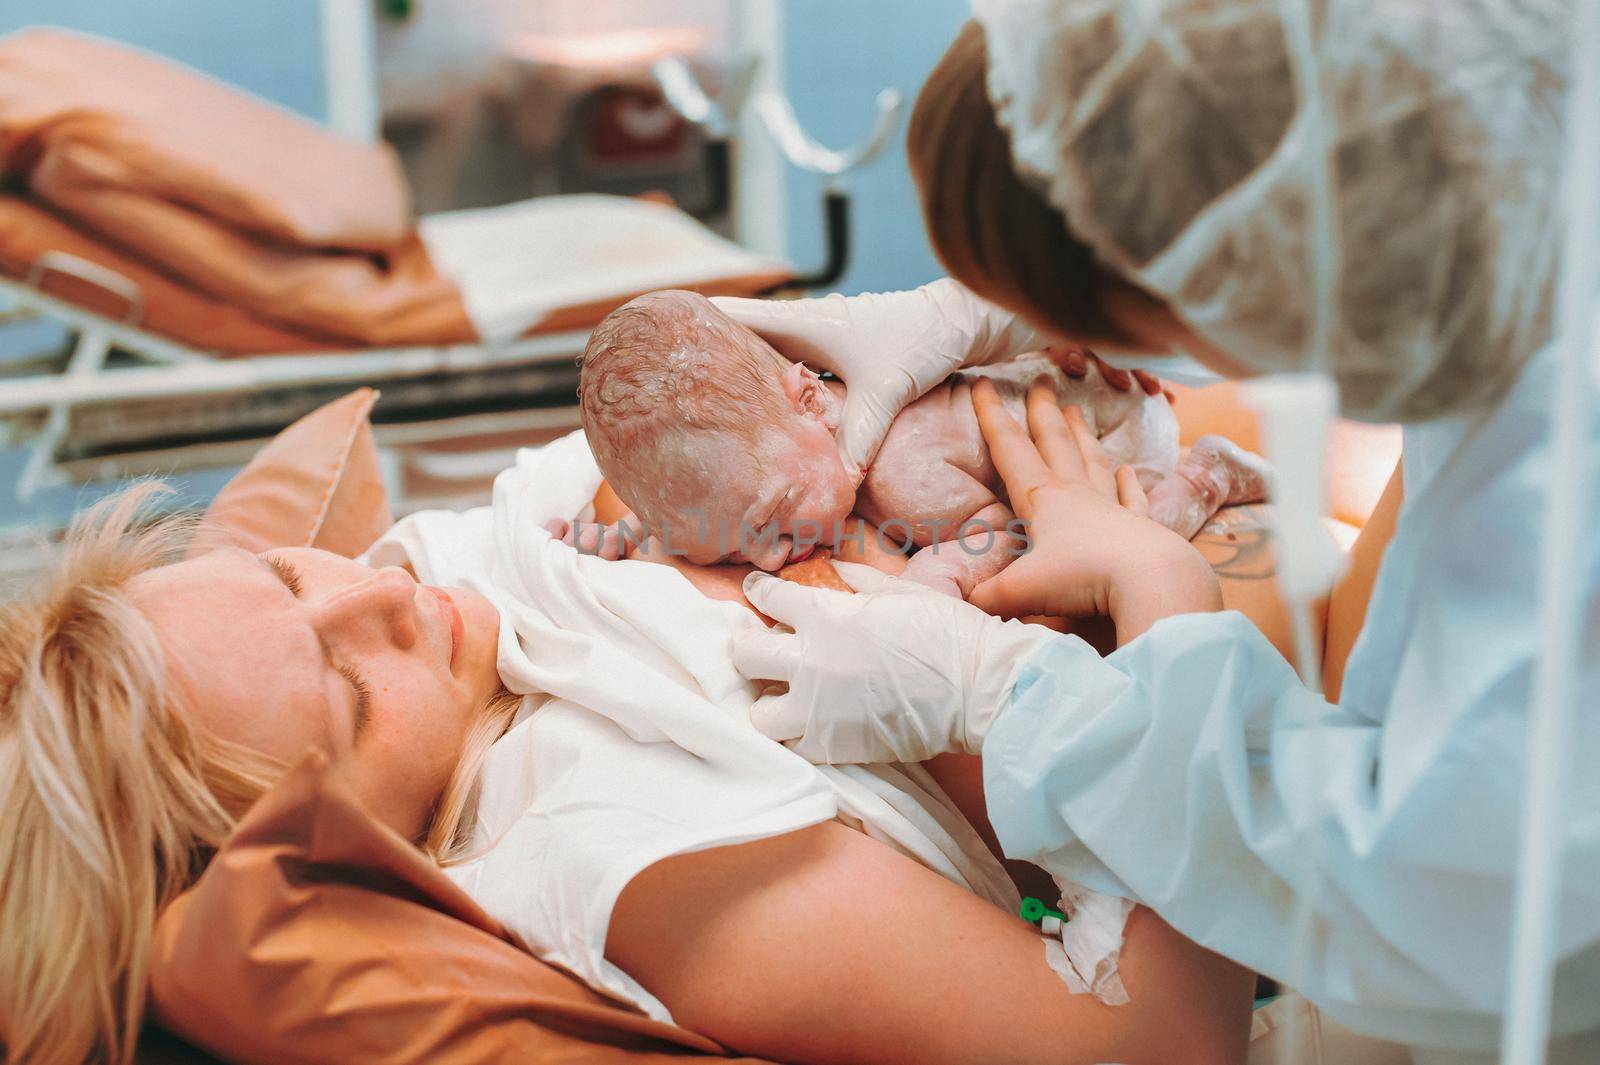 Close-up of a newborn feeding on the mother's sternum in the maternity ward of a hospital, immediately after birth